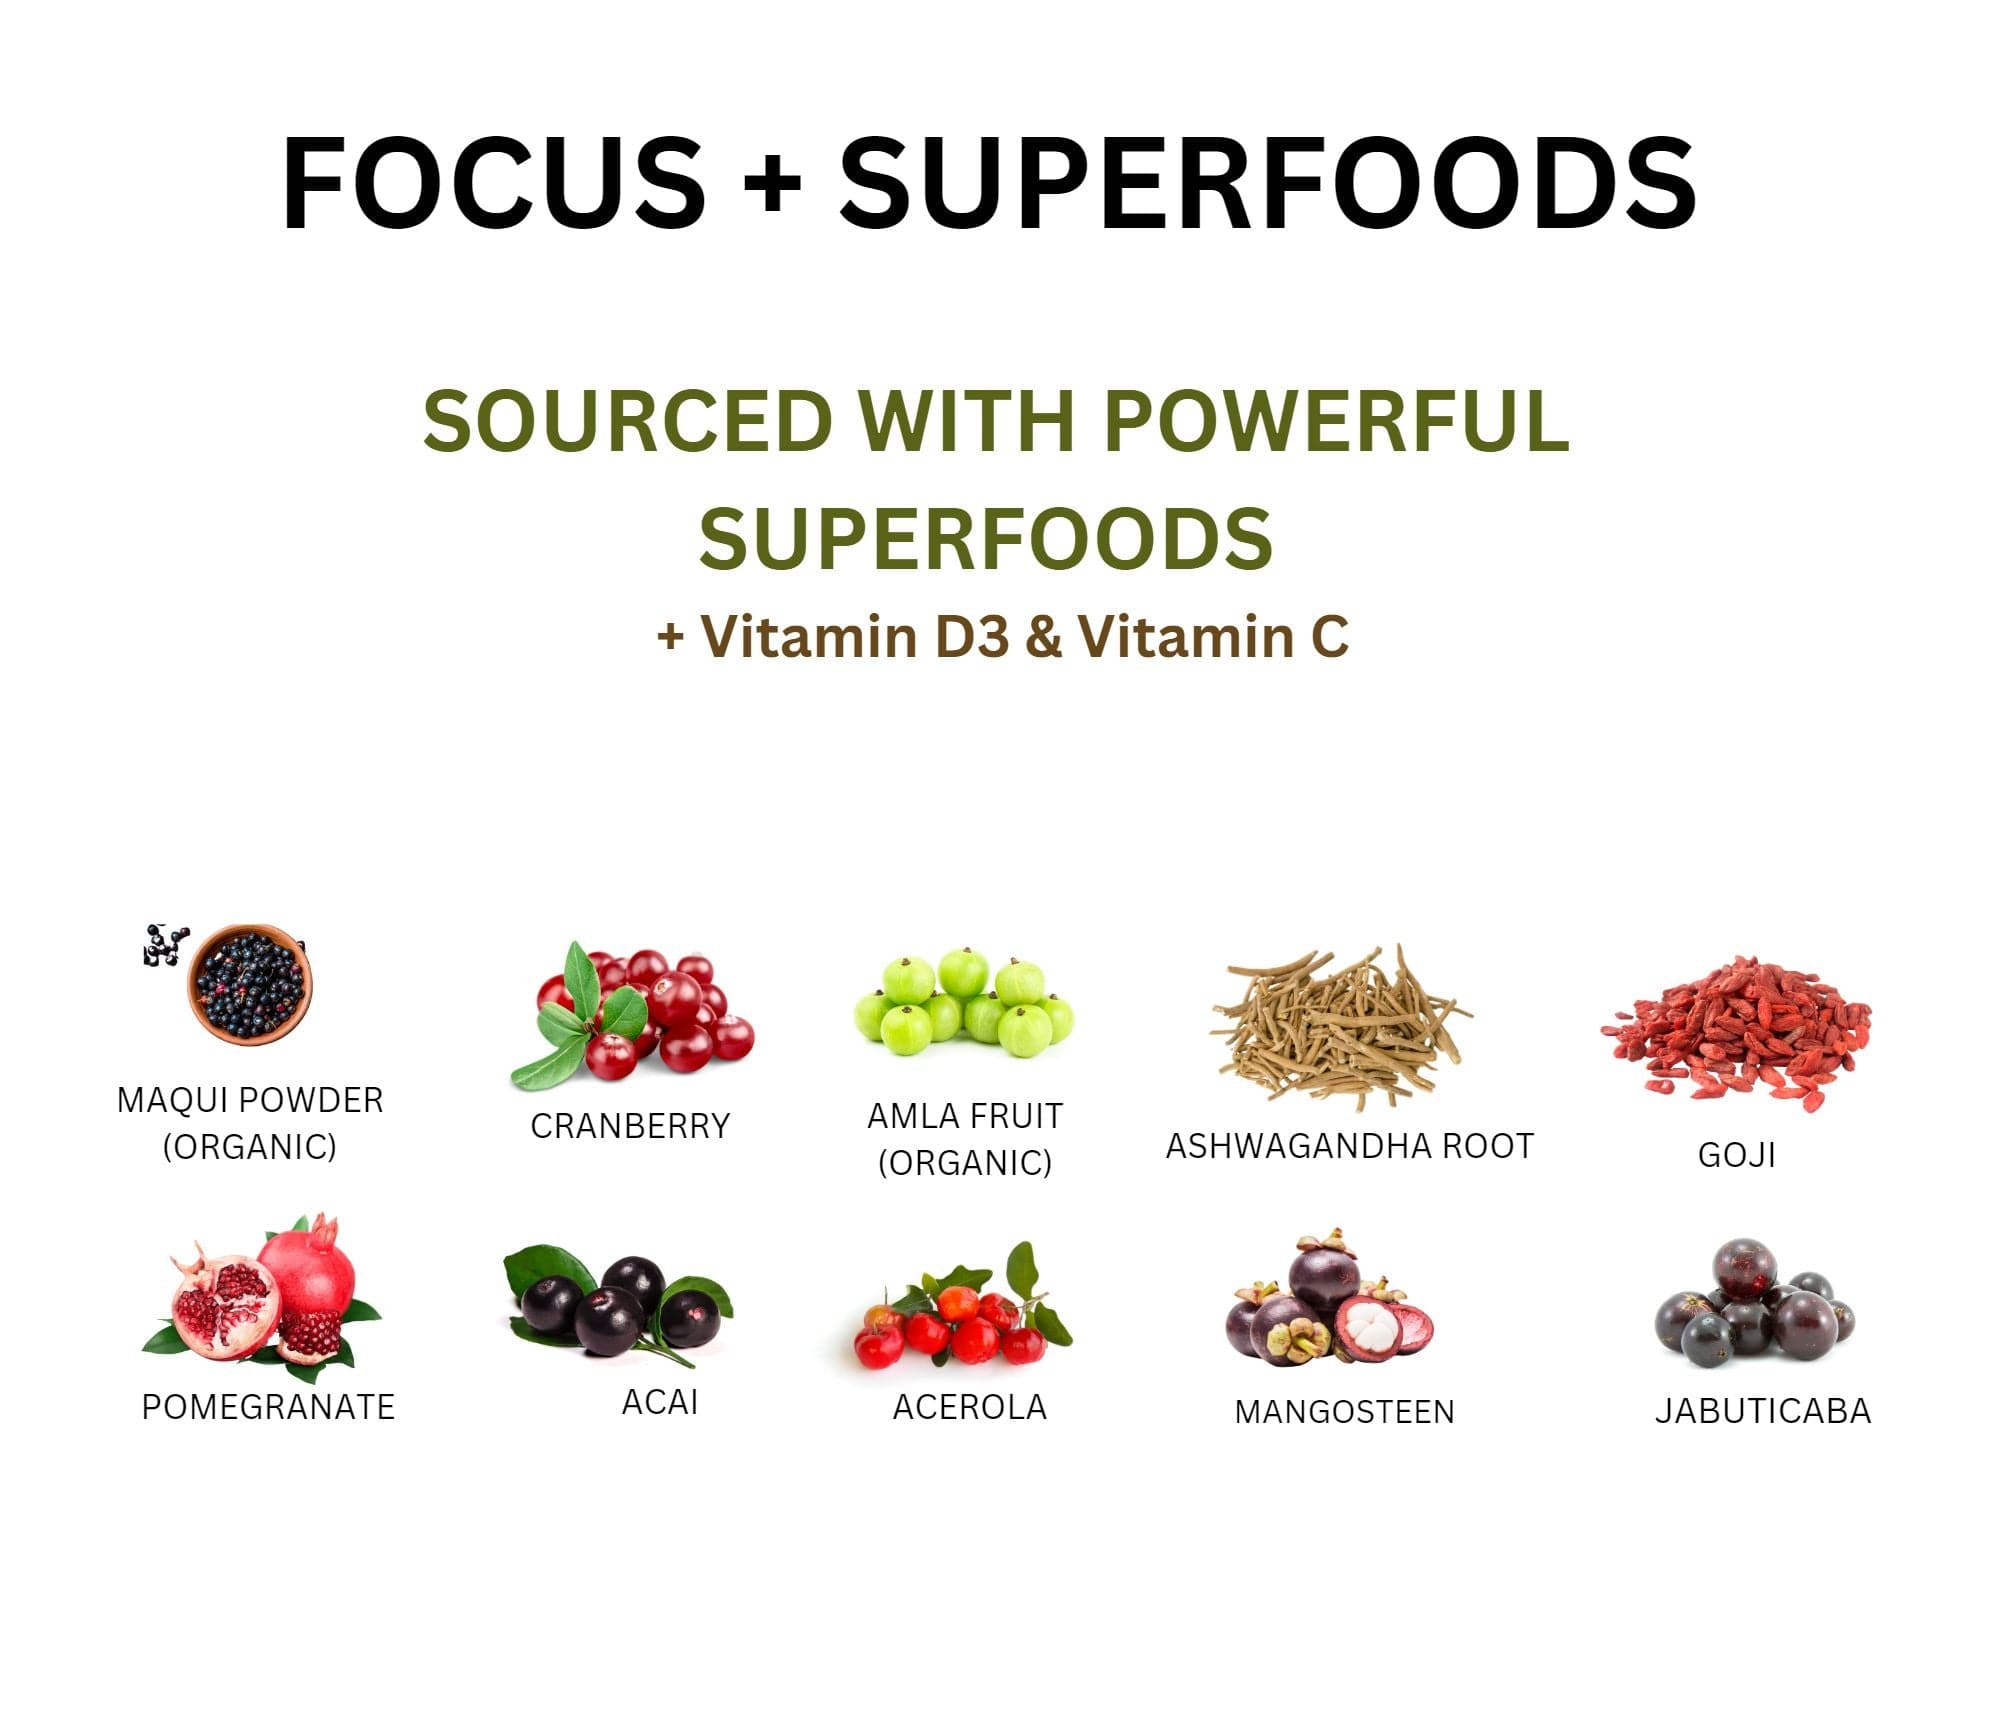 Focus gummy vitamins sourced with powerful superfoods, vitamin D3, and vitamin C